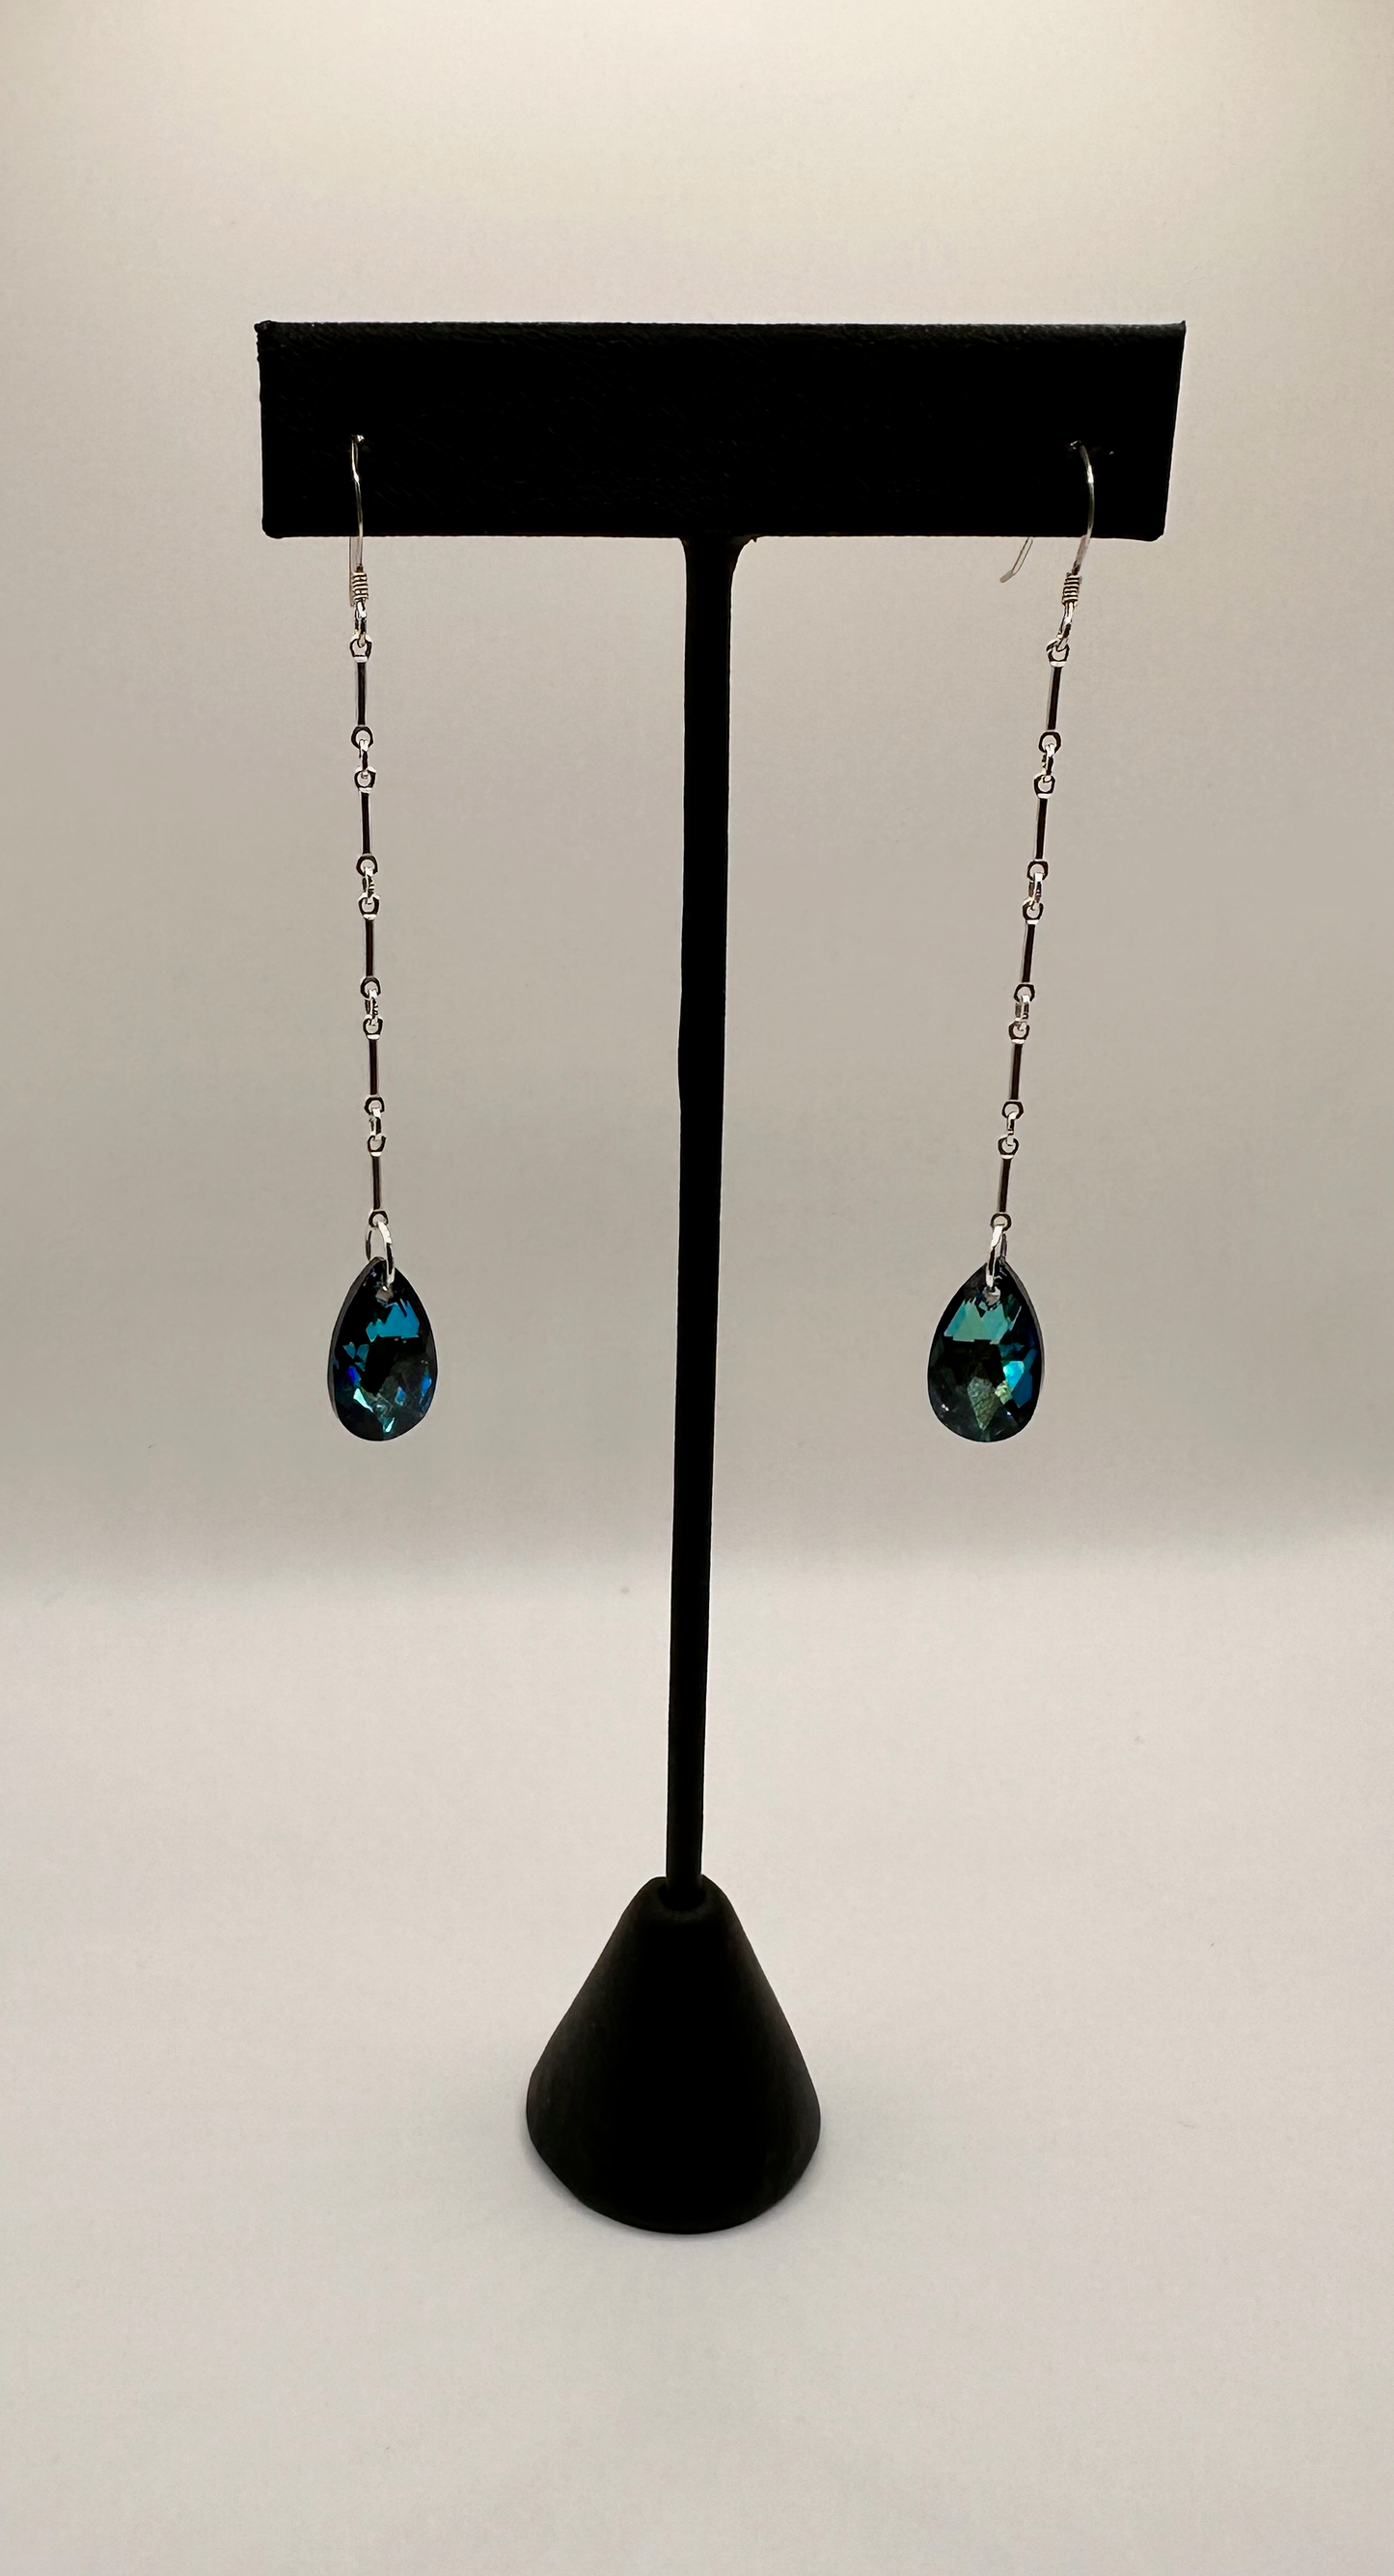 Swarovski Crystal with 14k Gold Fill Earrings